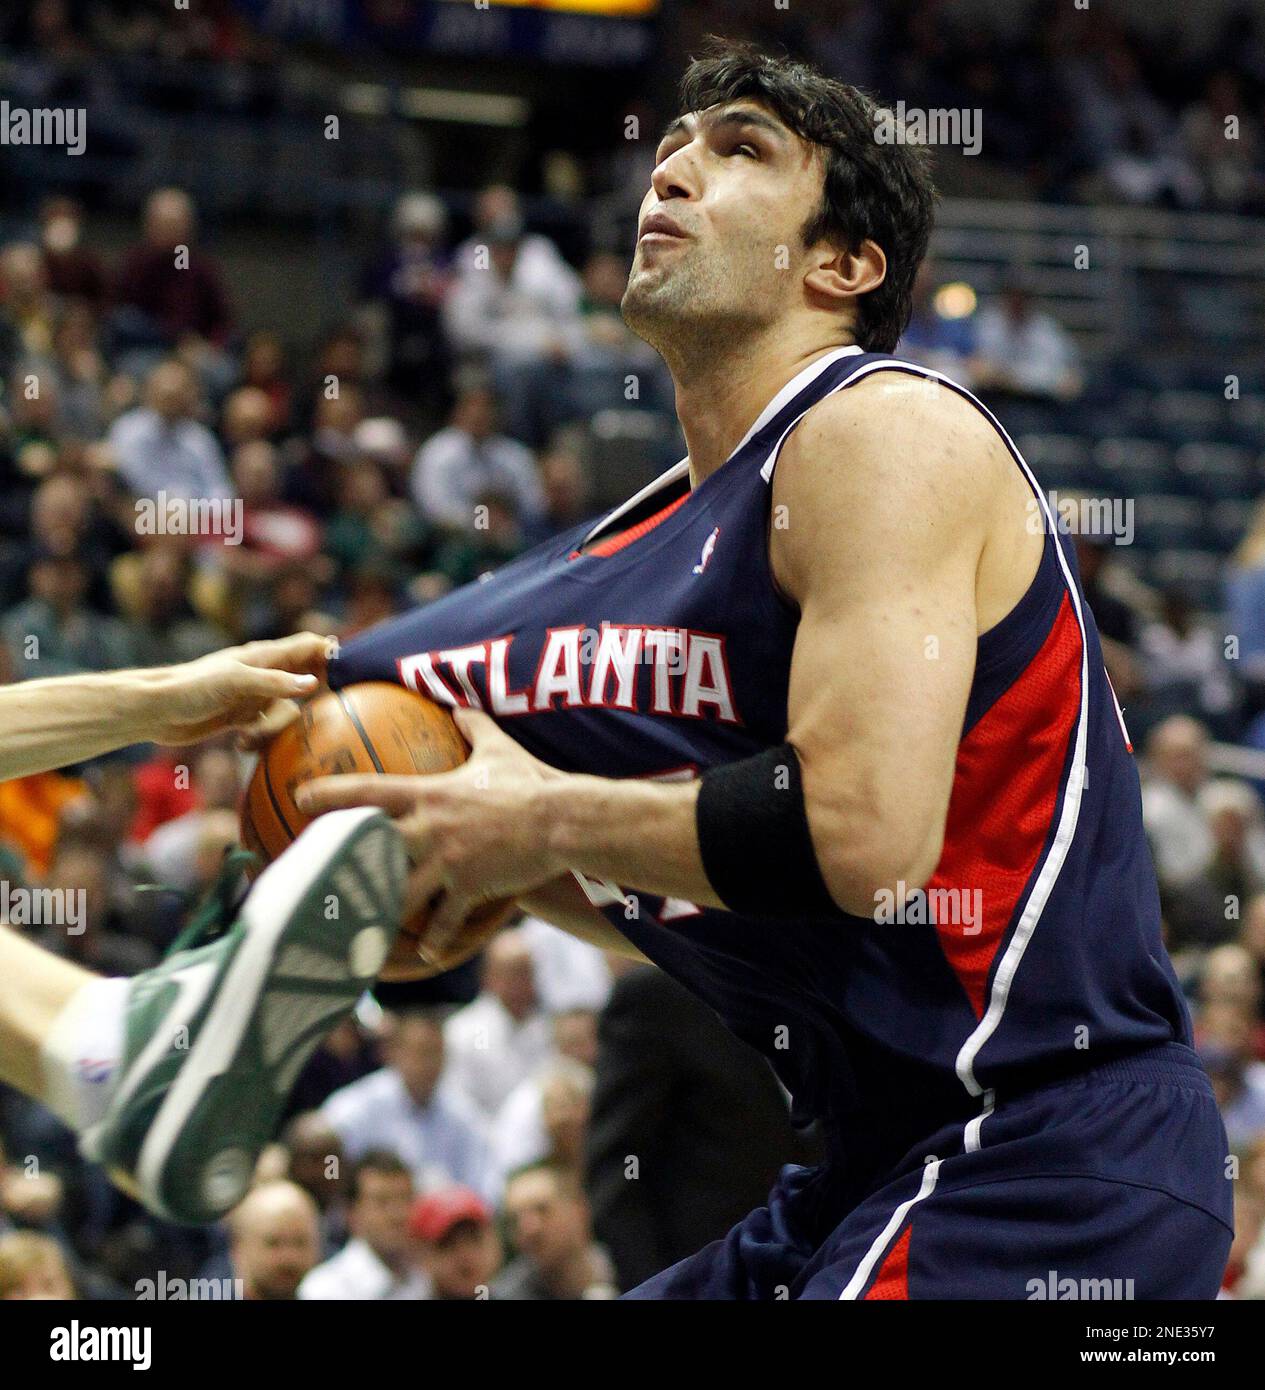 Atlanta Hawks' Zaza Pachulia has his jersey tugged by the Milwaukee Bucks'  Luke Ridnour, not pictured, in the first half of an NBA basketball game  Monday, March 22, 2010, in Milwaukee. (AP